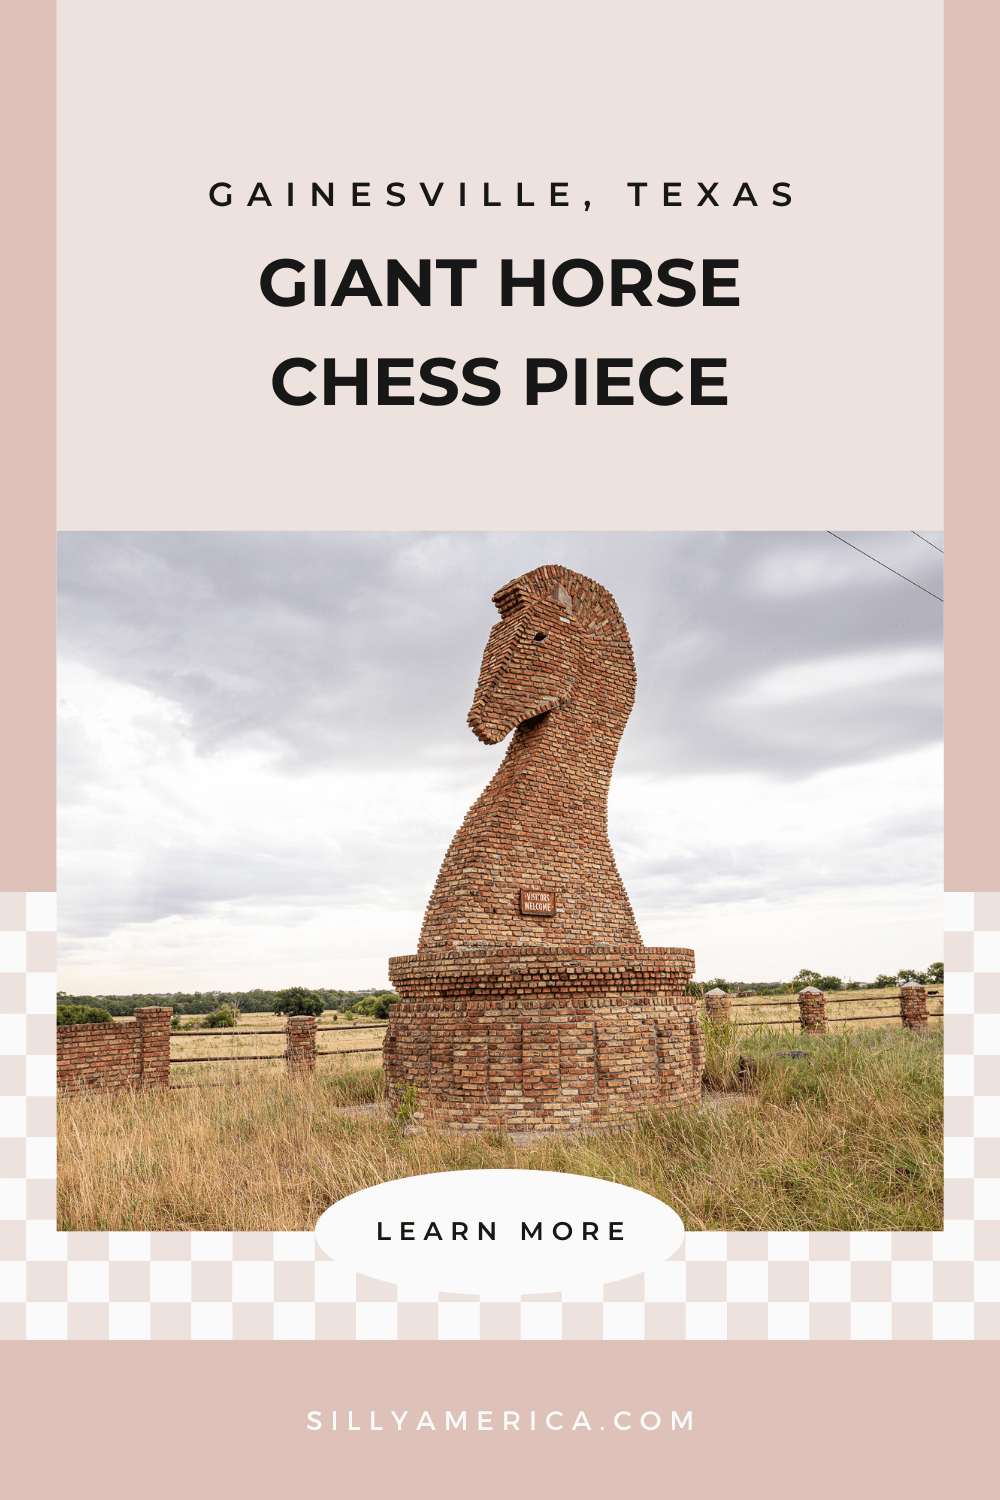 If you've ever driven I-35 between Oklahoma and Texas, you've probably seen this roadside attraction. After all, it is just a pawn meant to lure you off the highway: the Giant Horse Chess Piece in Gainesville, Texas. Visit the Brick Chess Knight roadside attraction on a Texas road trip or day trip from Dallas. #Texas #TexasRoadTrip #RoadTripStop #RoadsideAttraction #RoadsideAttractions #TexasRoadsideAttraction